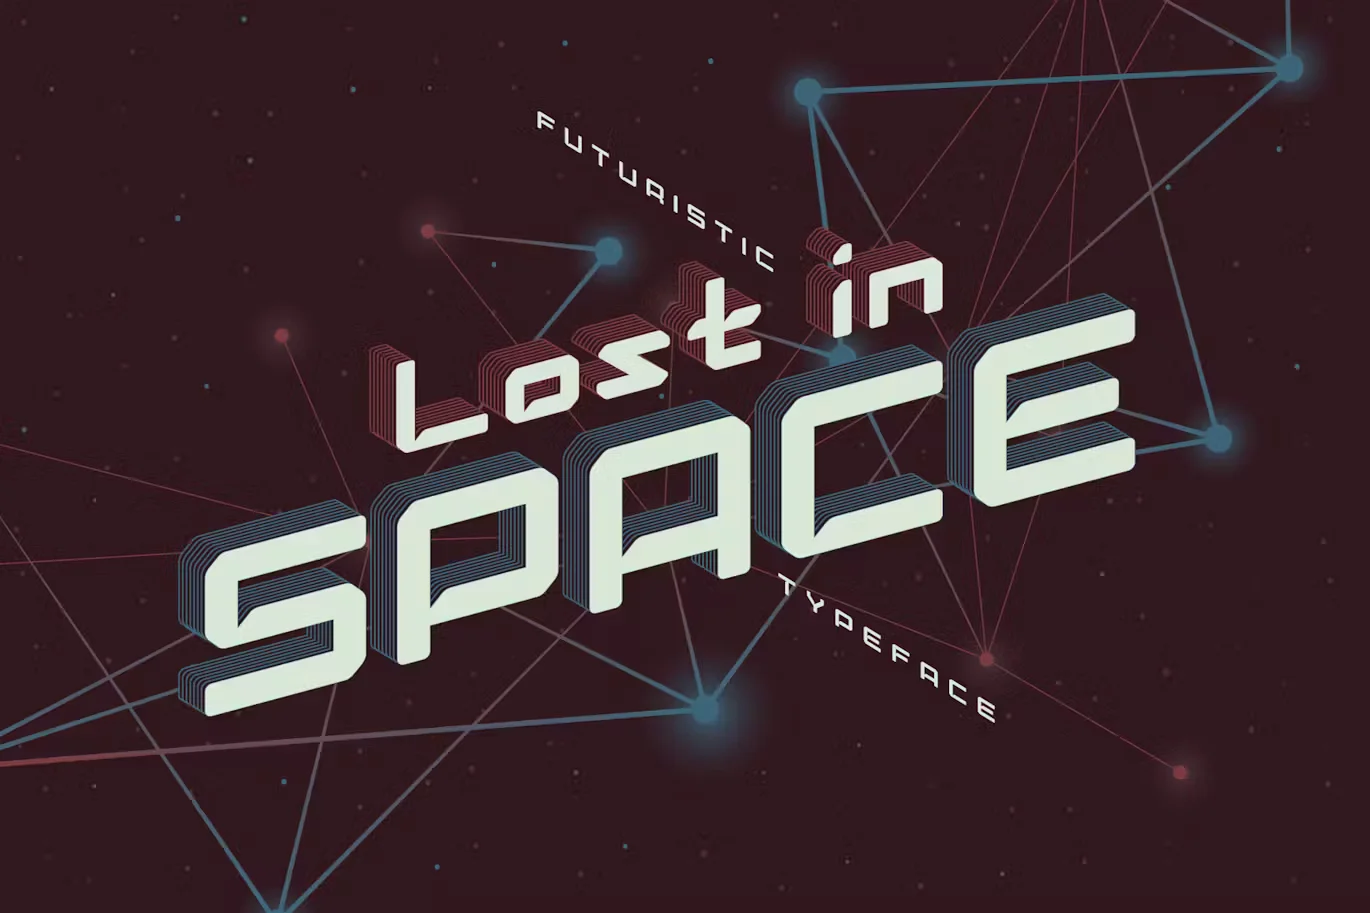 Lost in space Square Font